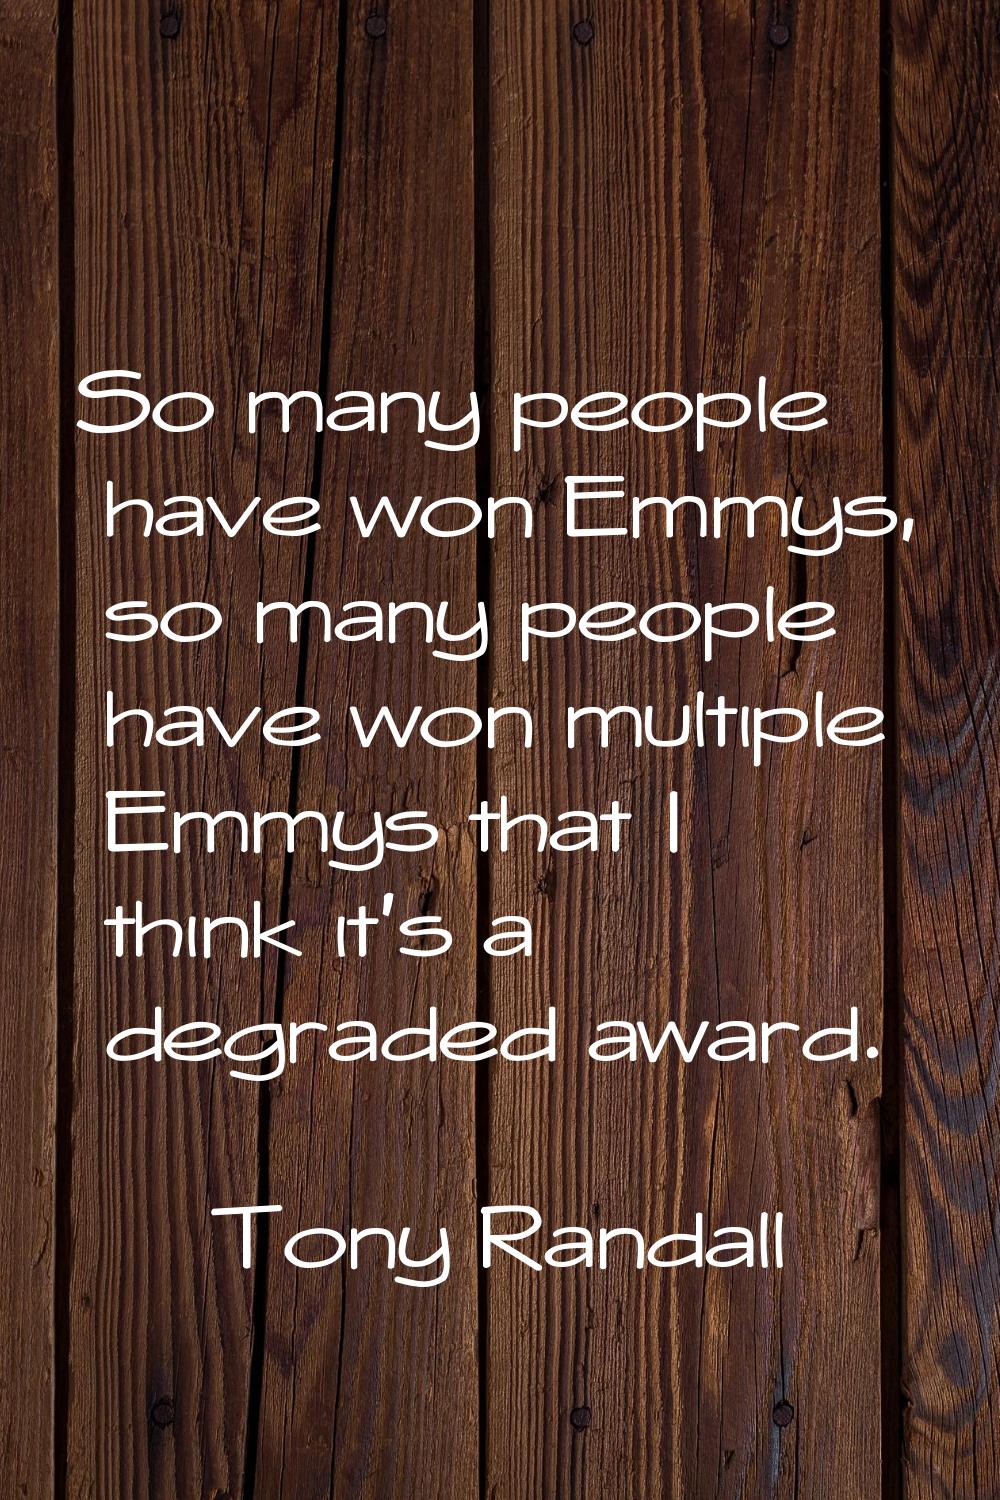 So many people have won Emmys, so many people have won multiple Emmys that I think it's a degraded 